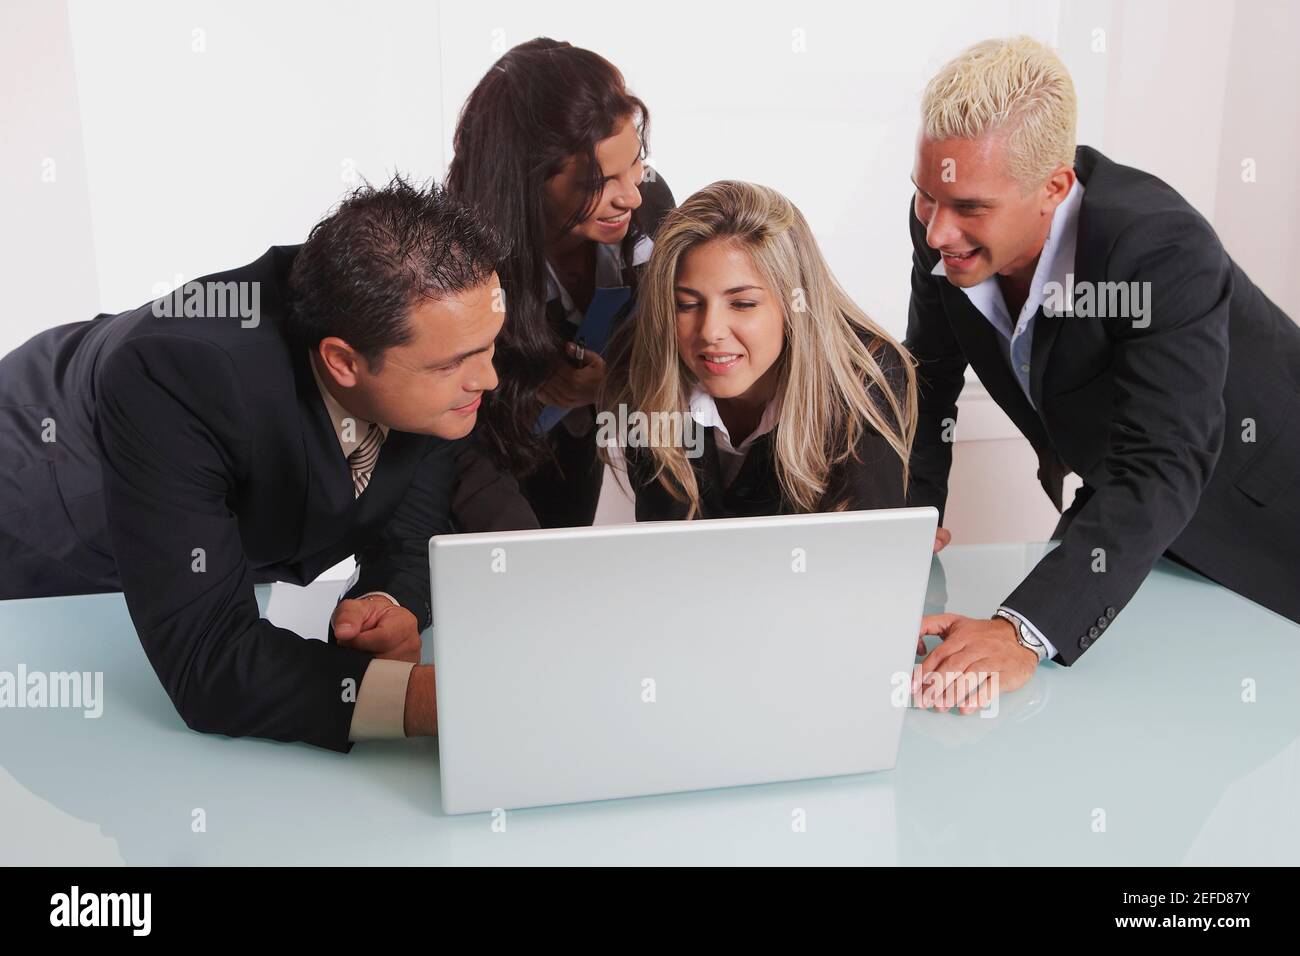 Two businessmen and two businesswomen using a laptop Stock Photo